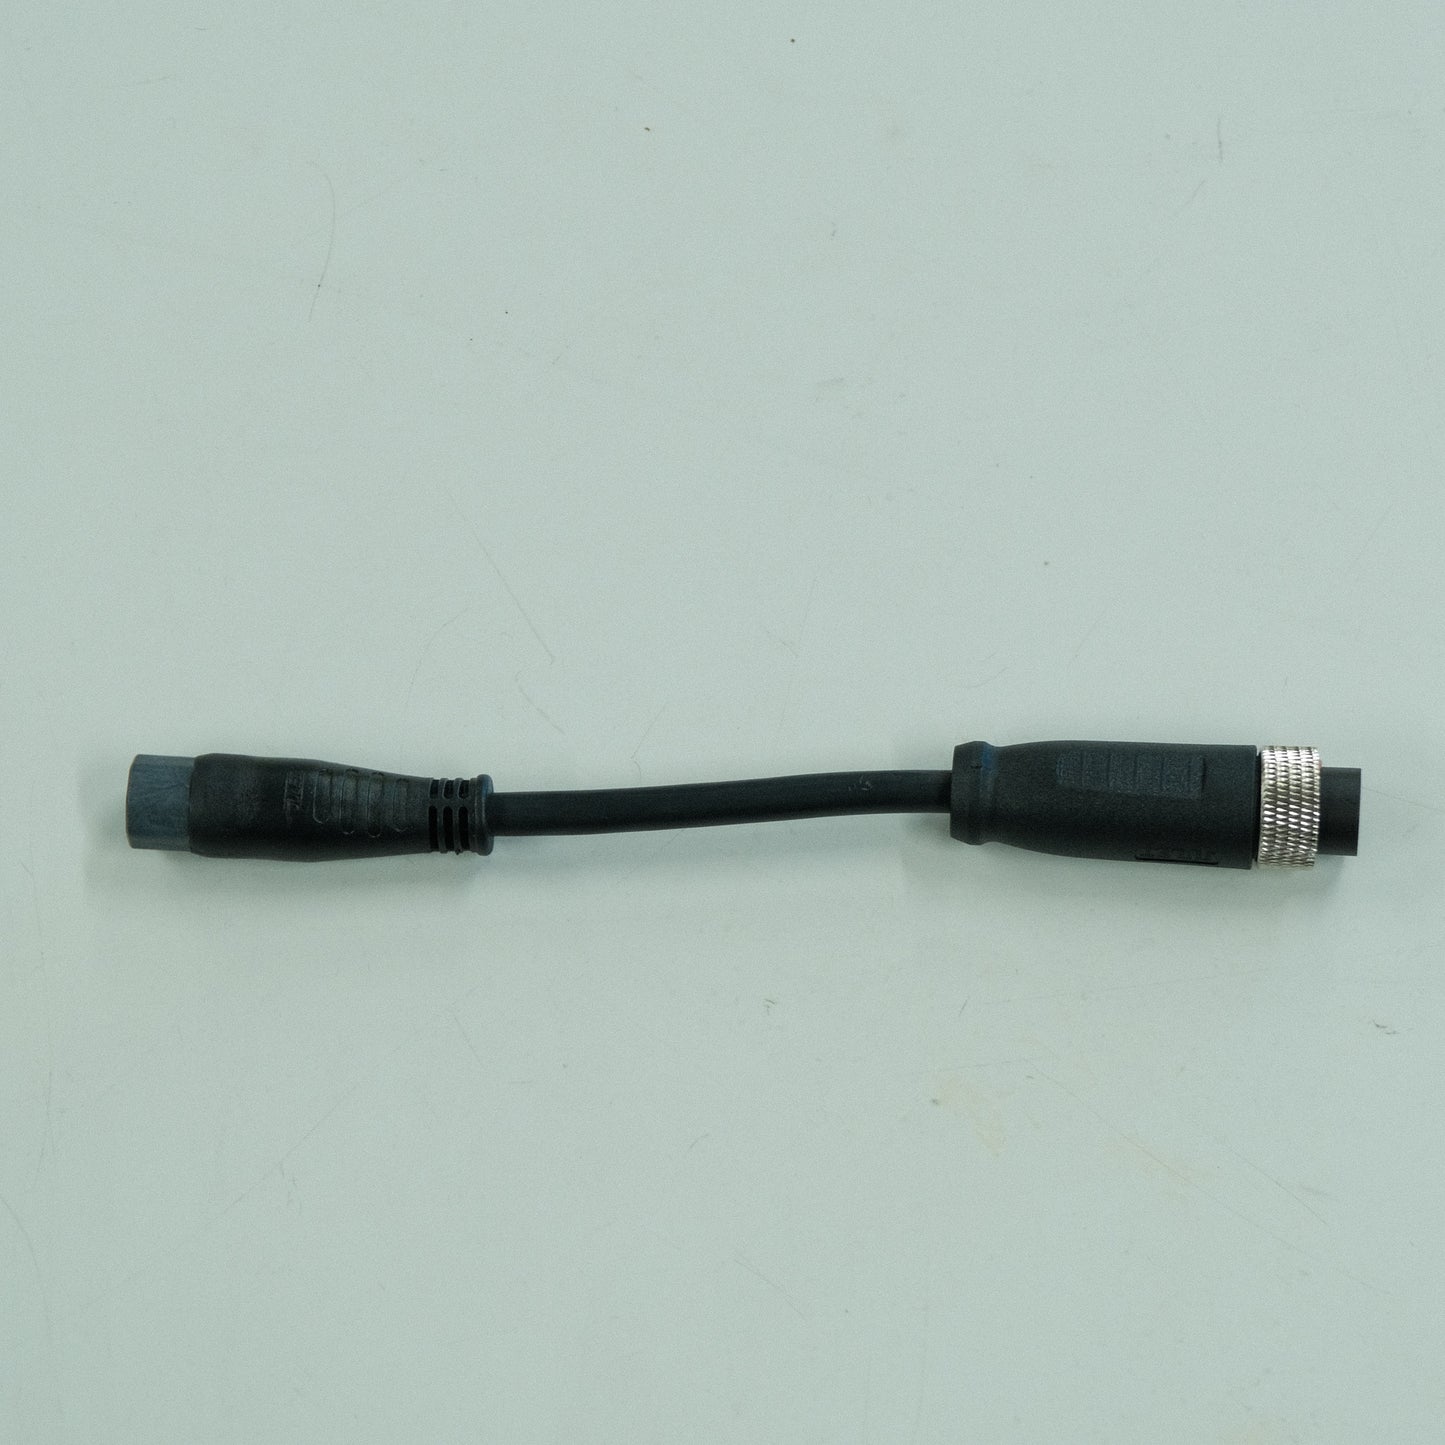 Adapter - Motor Cable - Higo Z916 Male to L1019 Female